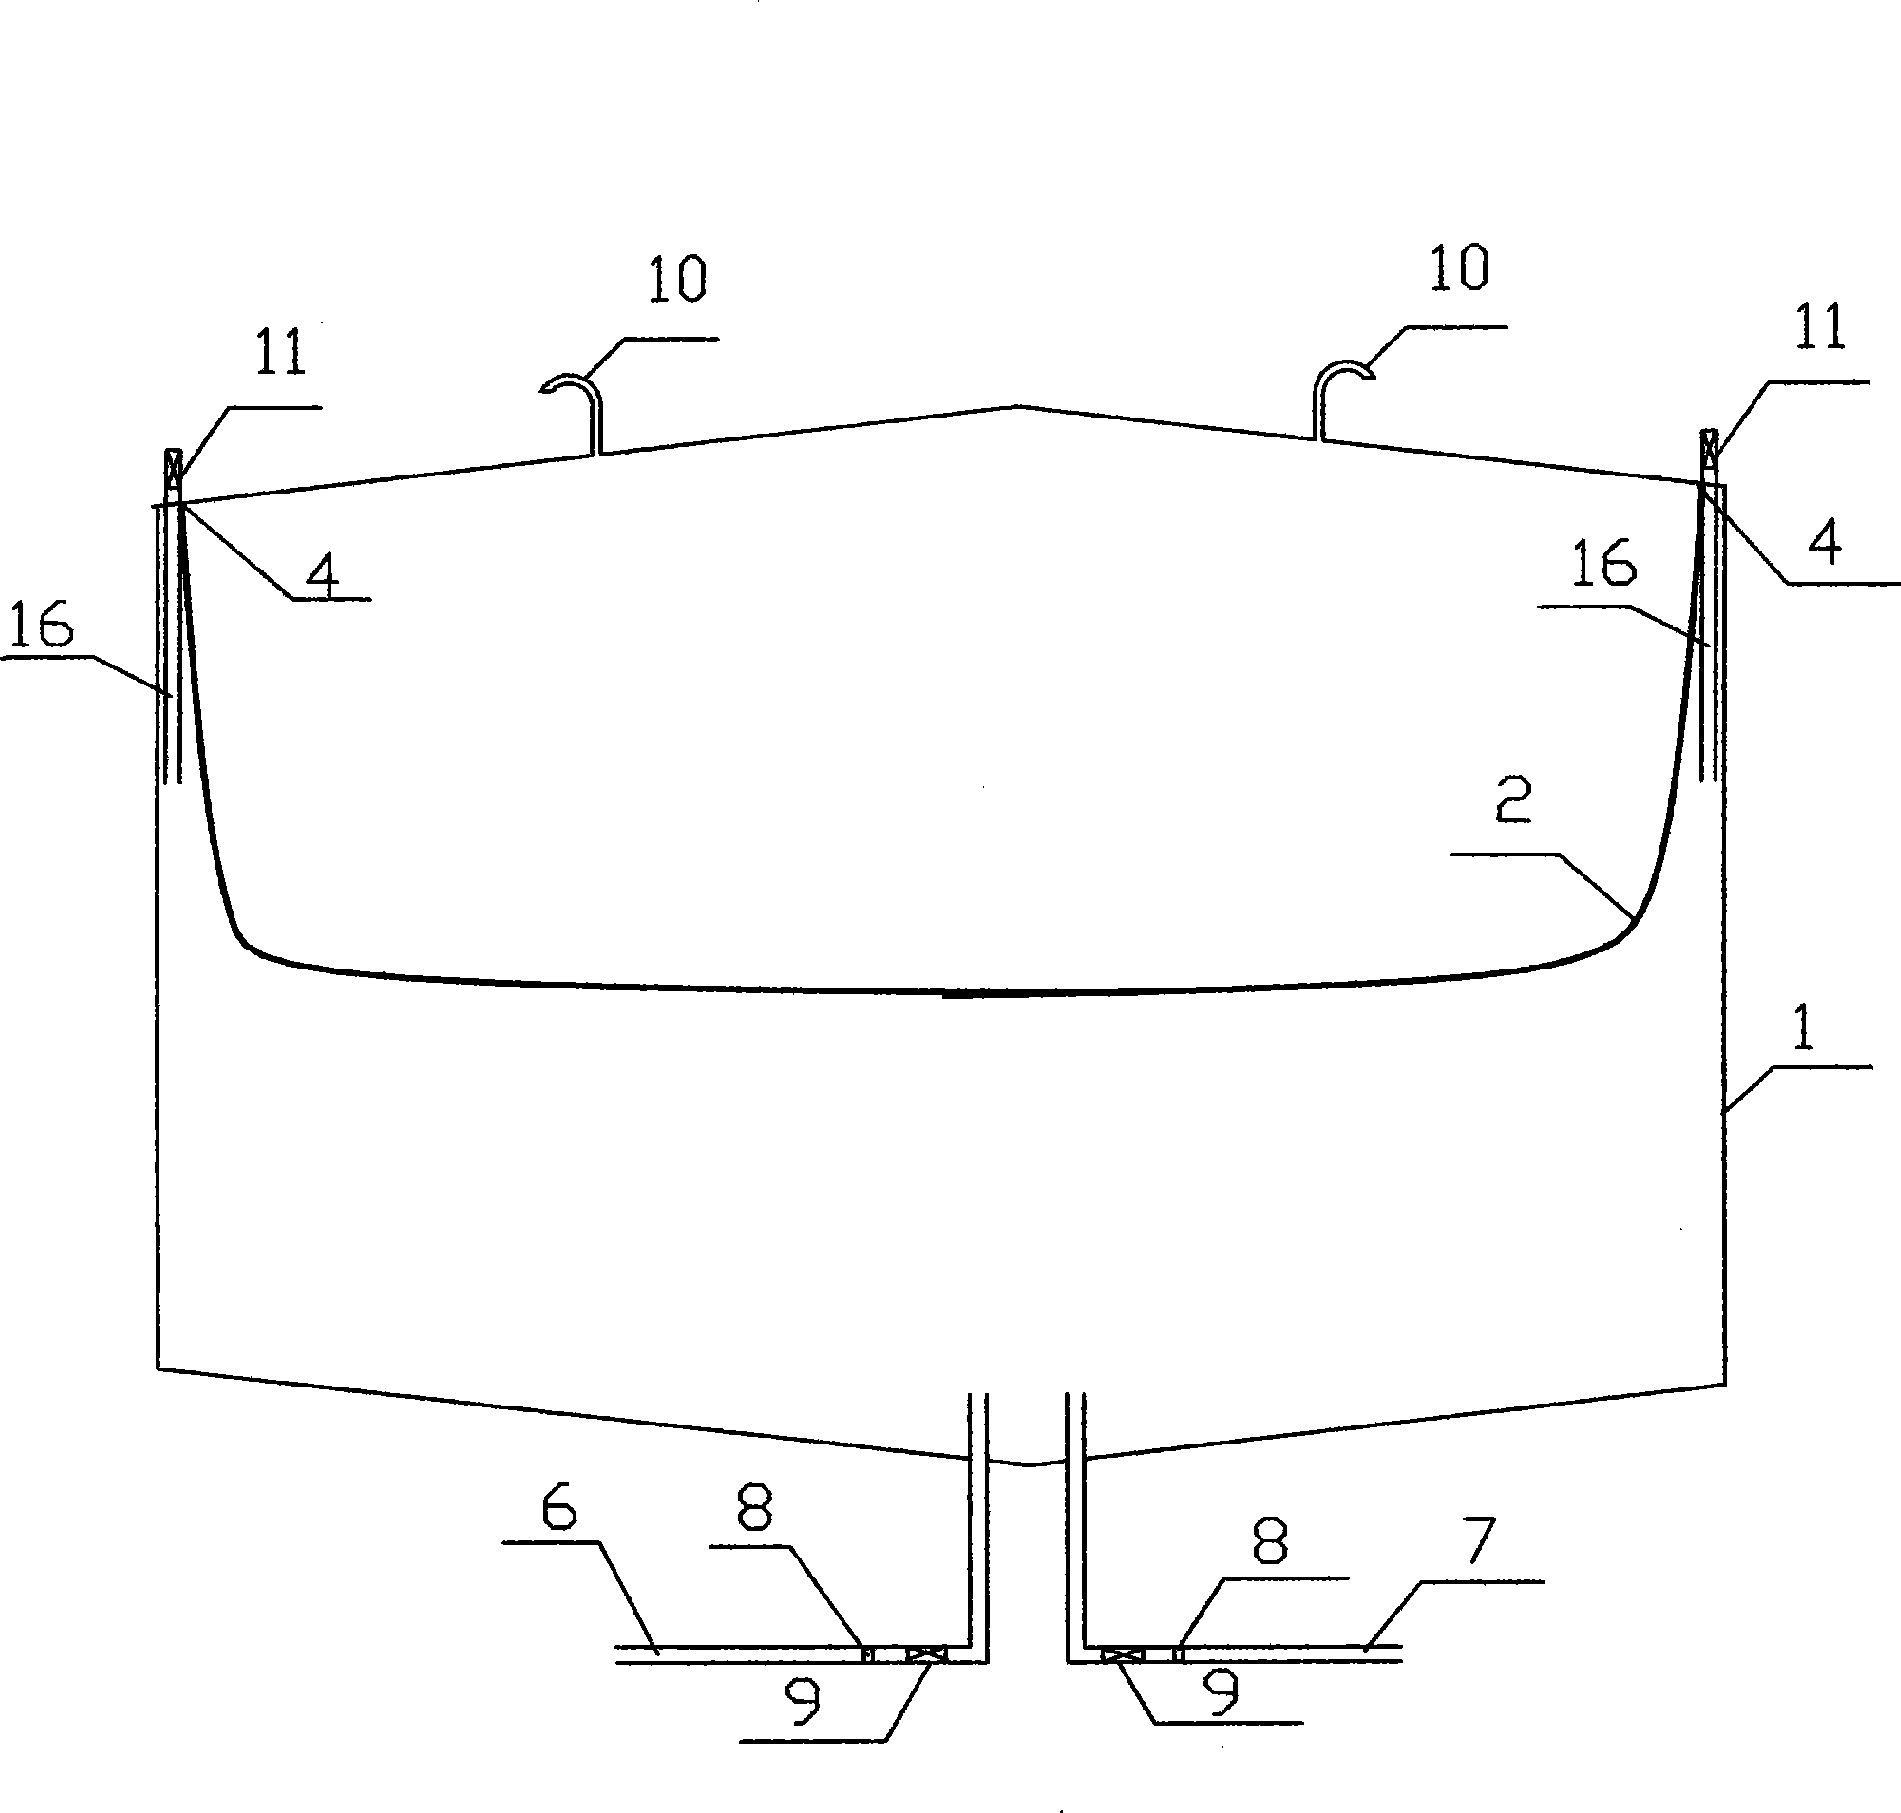 Film isolation type oil storage and transportation apparatus